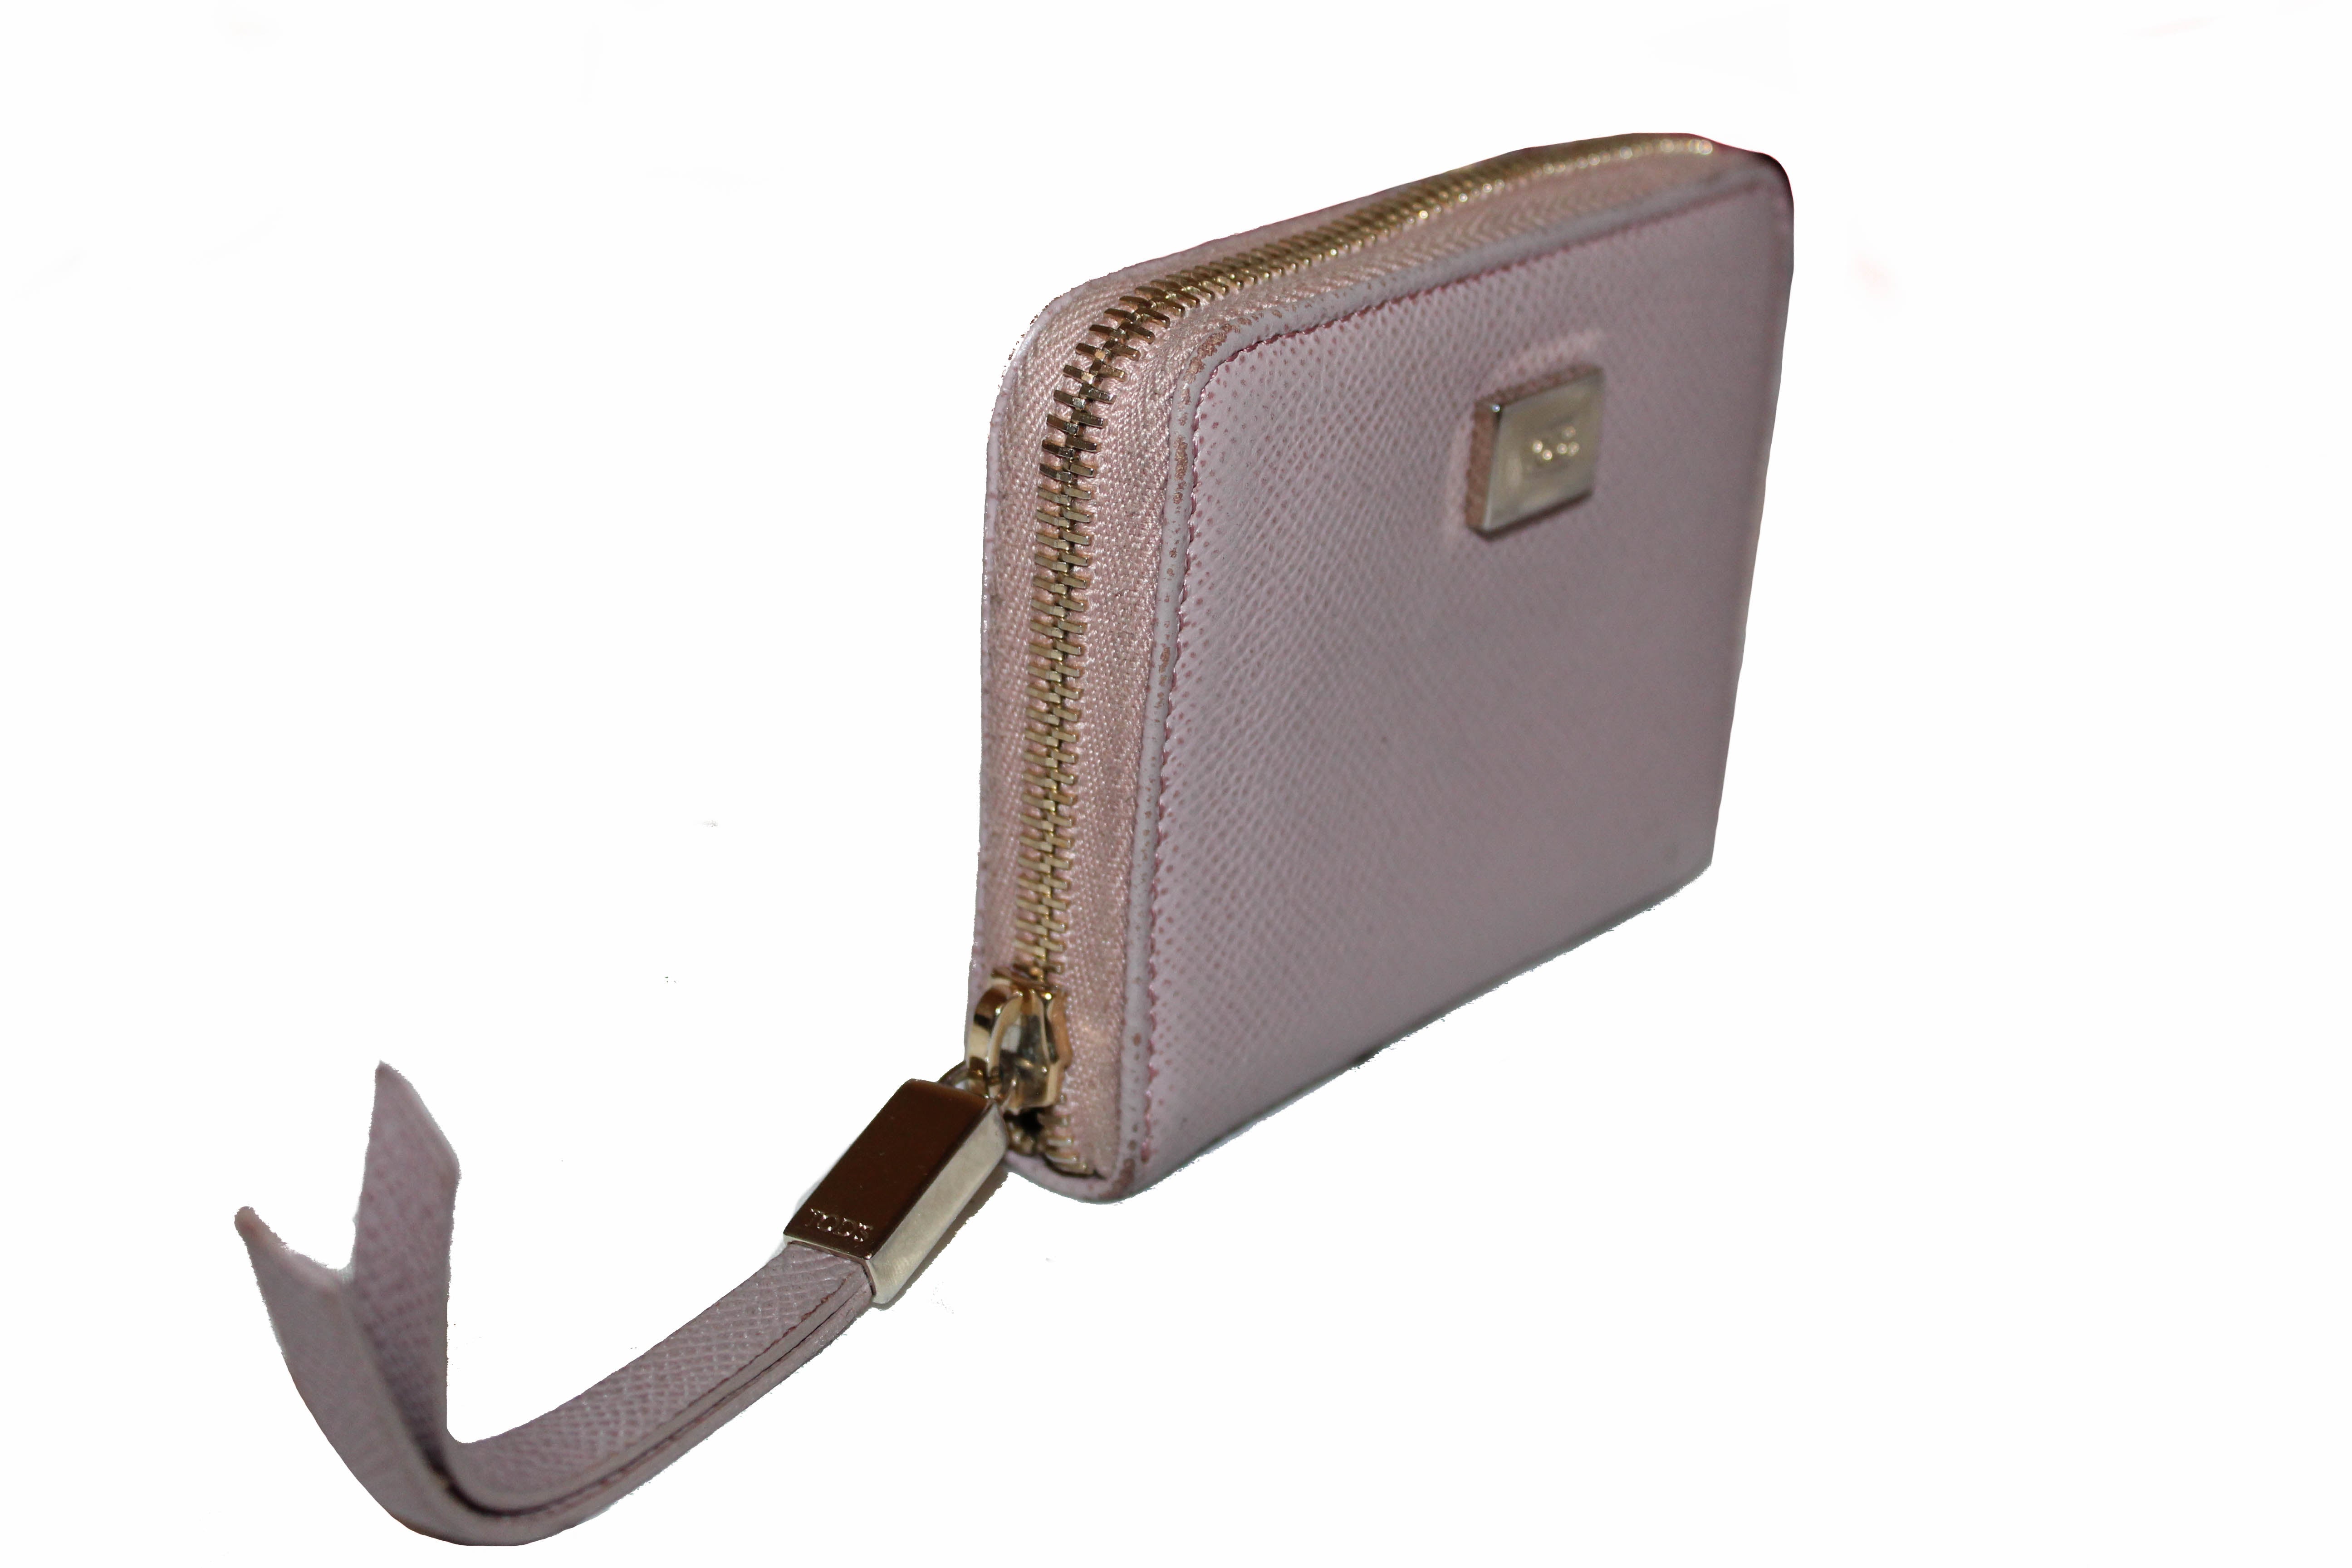 Authentic Tod's Pink Leather Card Holder